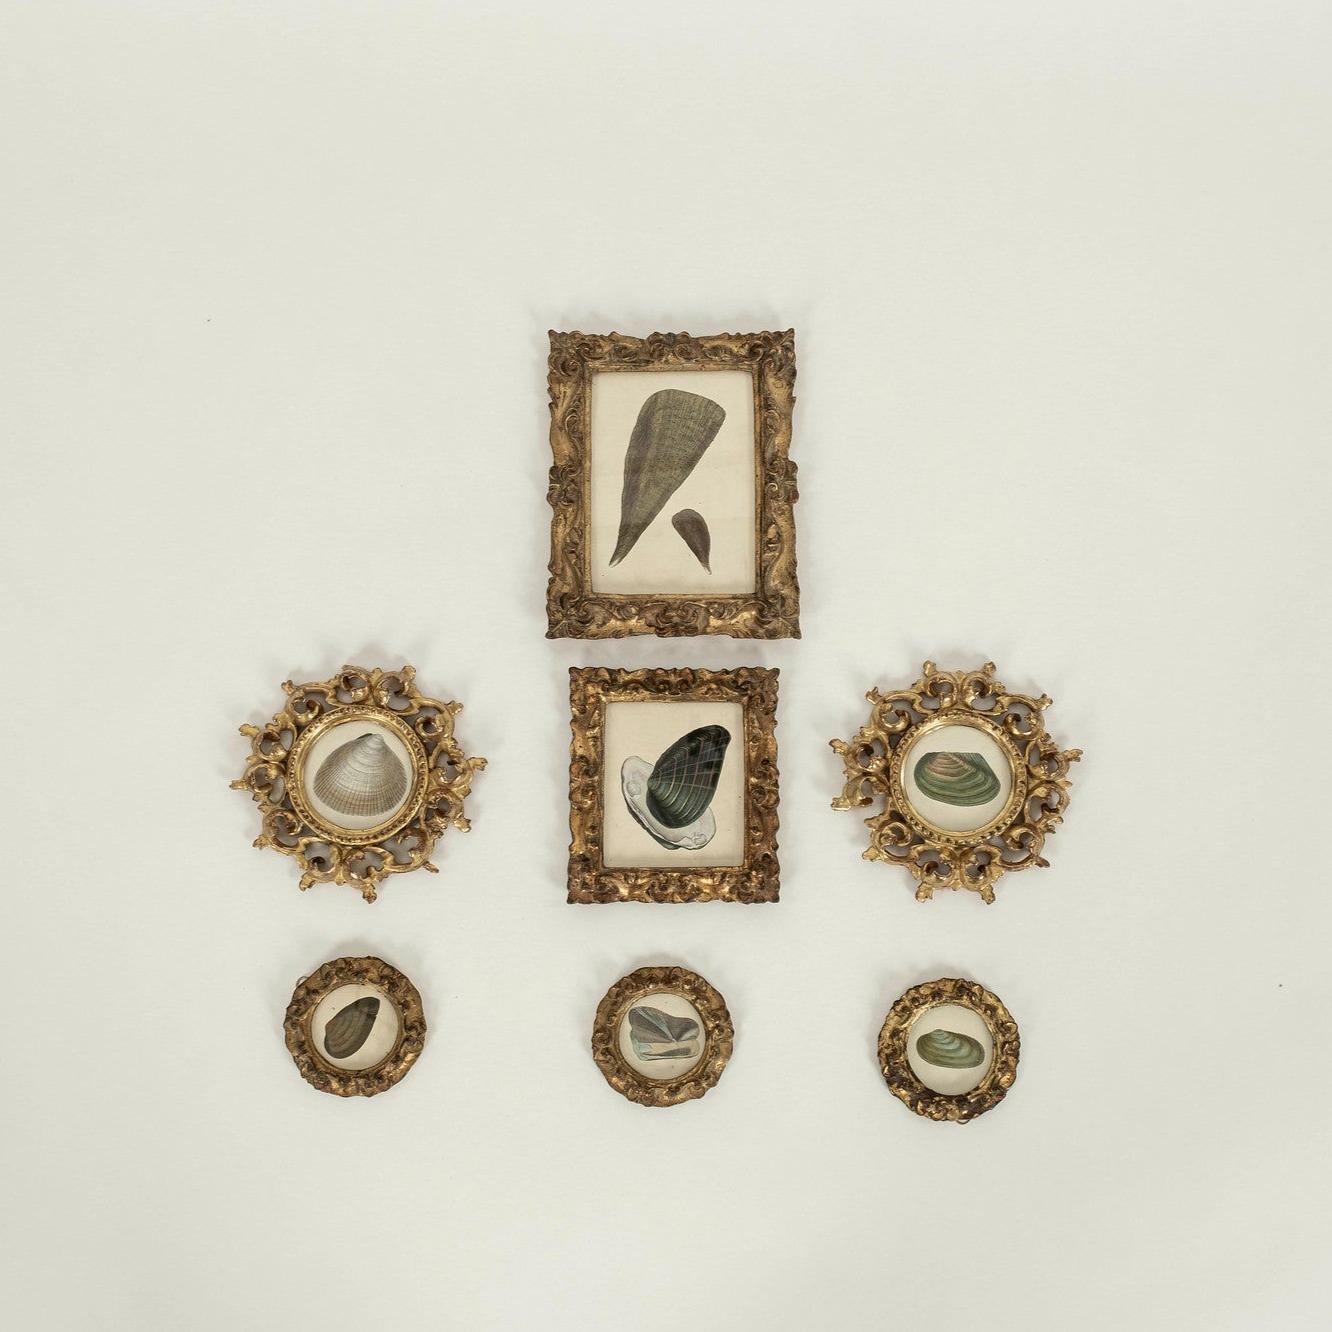 A unique collection of 19th Century hand colored mollusk engravings custom framed in vintage Italian gilt wood frames. Dimensions listed is for largest framed engraving.